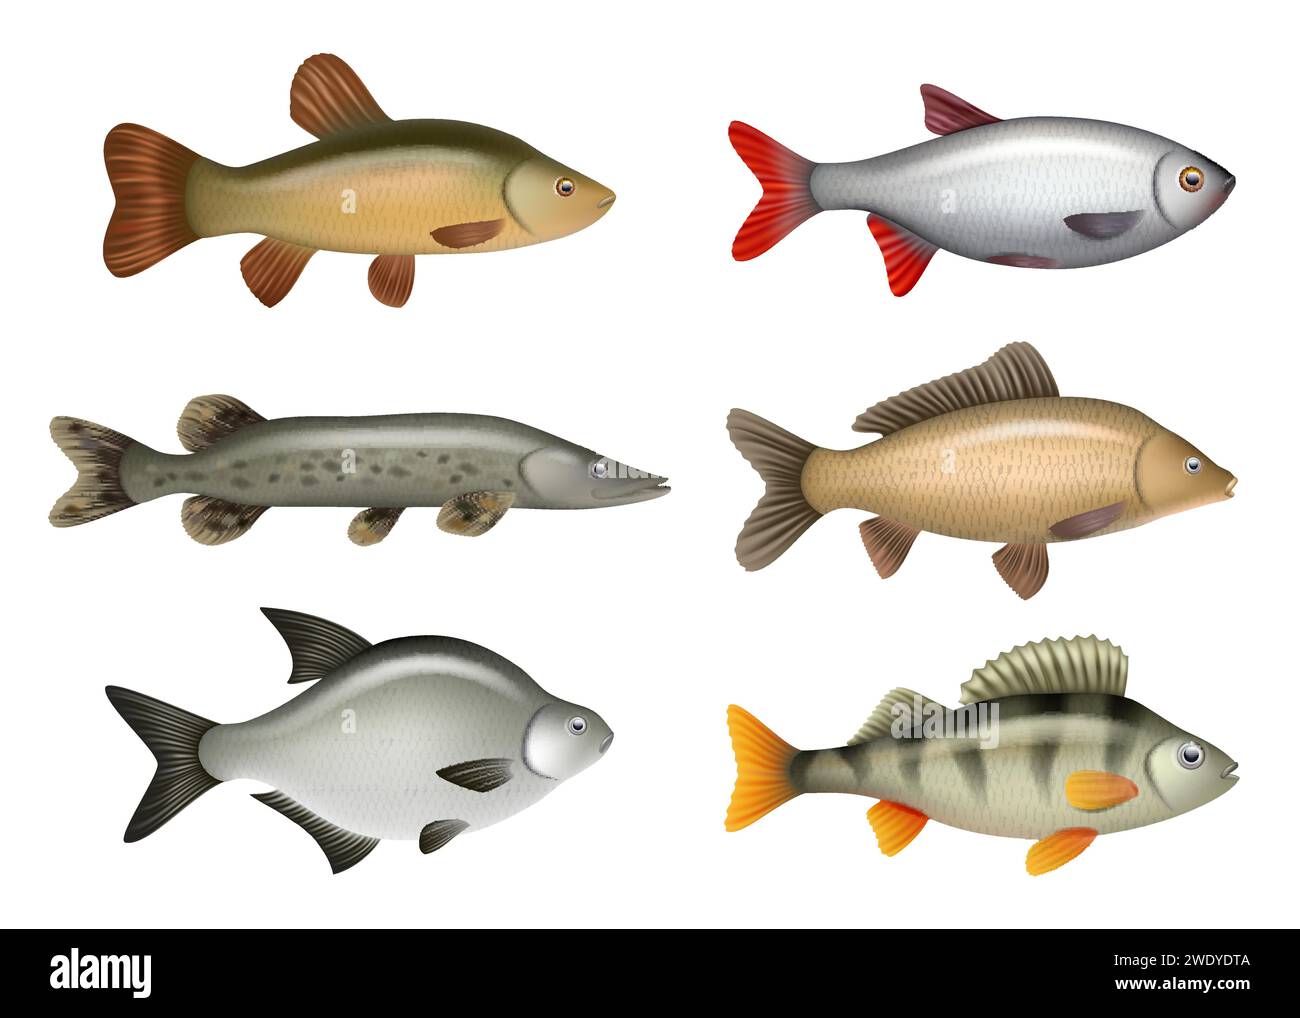 https://c8.alamy.com/comp/2WDYDTA/realistic-fish-river-swimming-water-fresh-fishes-herring-bass-salmon-decent-vector-pictures-set-isolated-illustration-of-river-animal-underwater-2WDYDTA.jpg